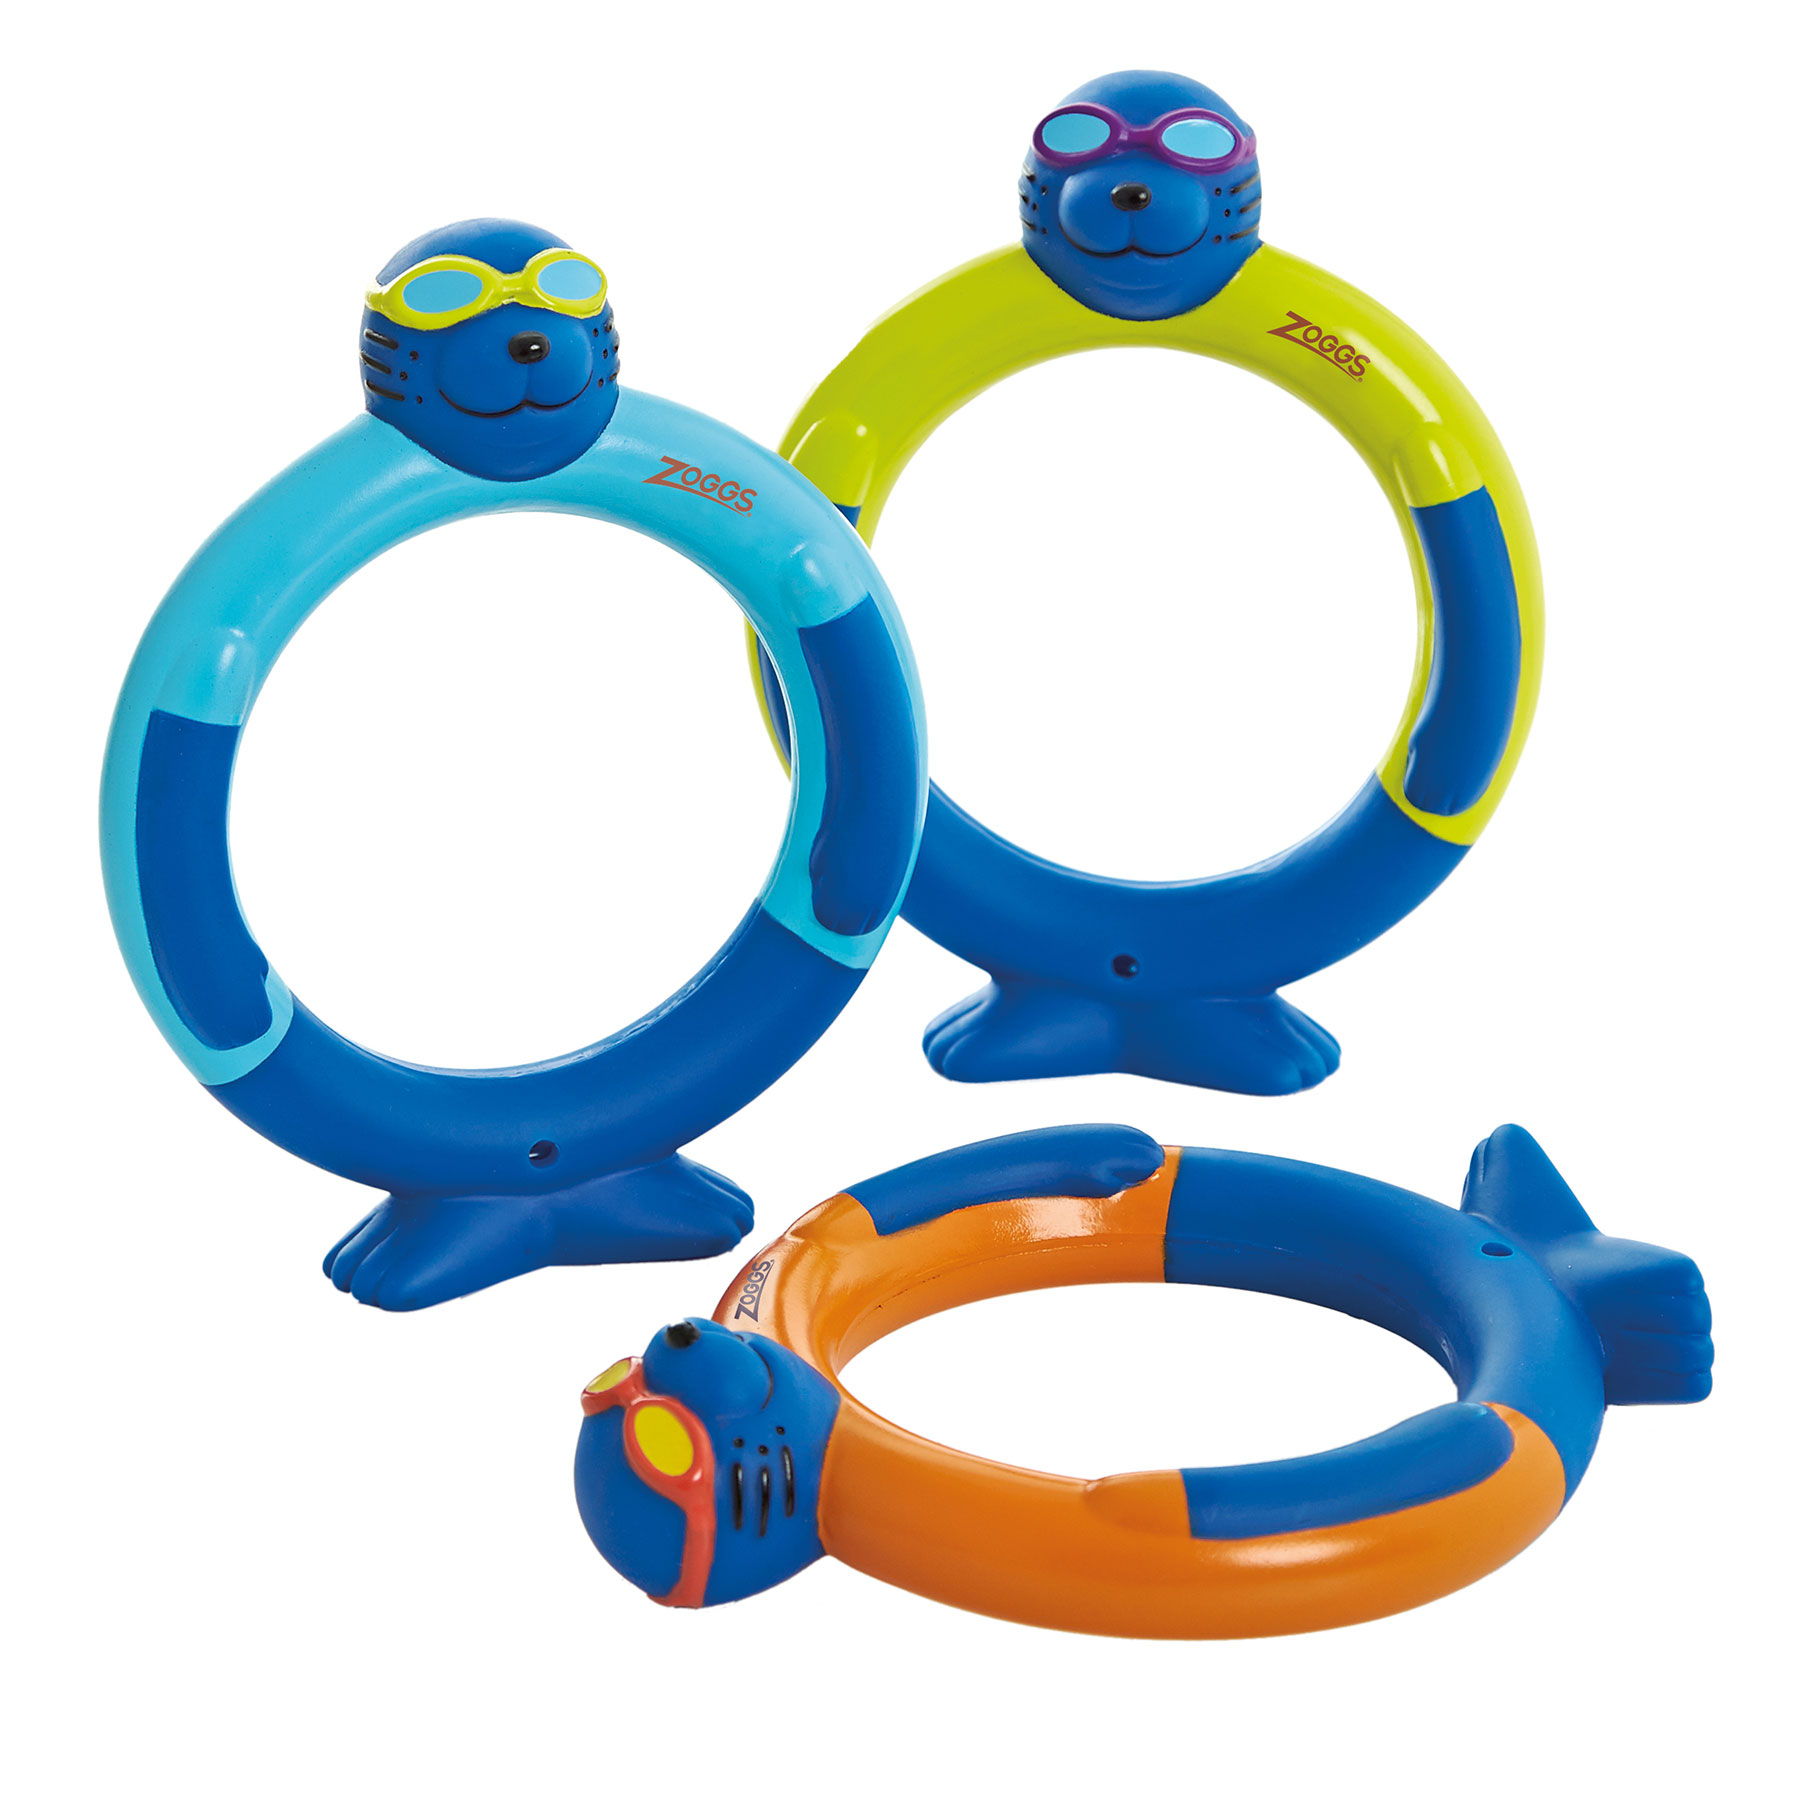 Zoggy Dive rings